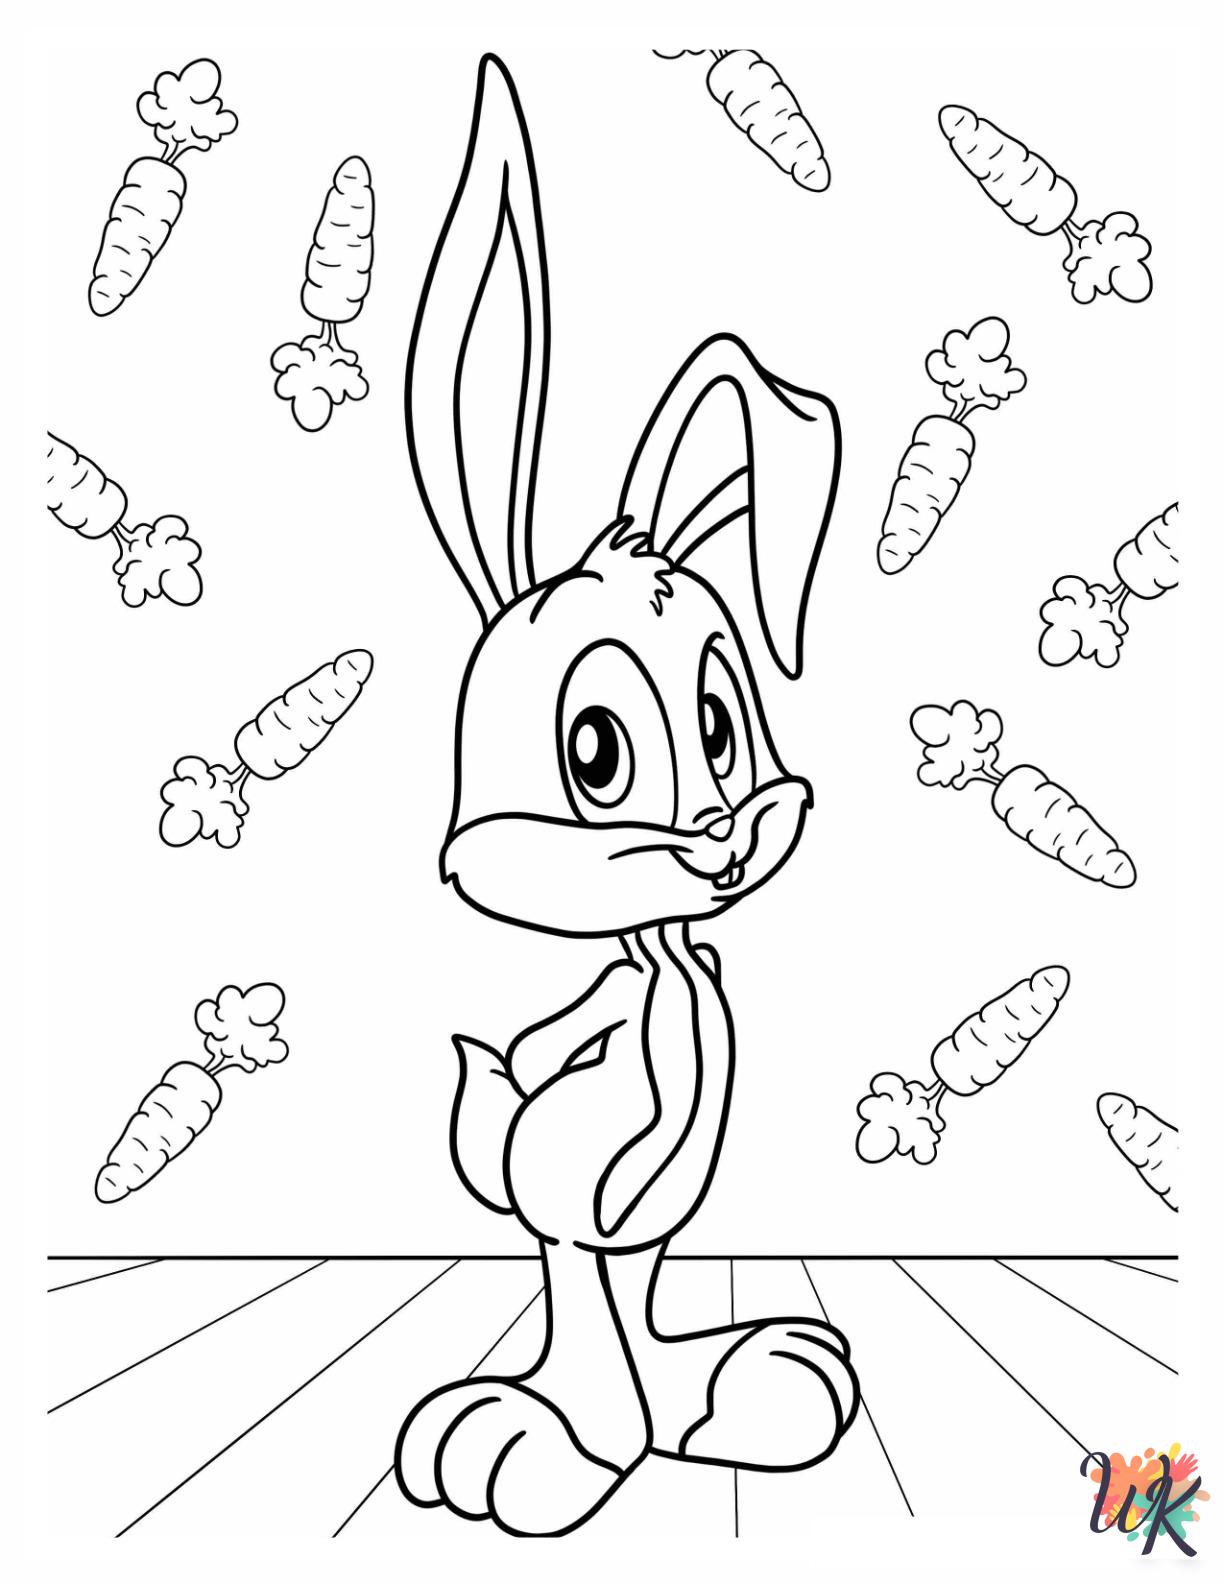 Bugs Bunny printable coloring pages